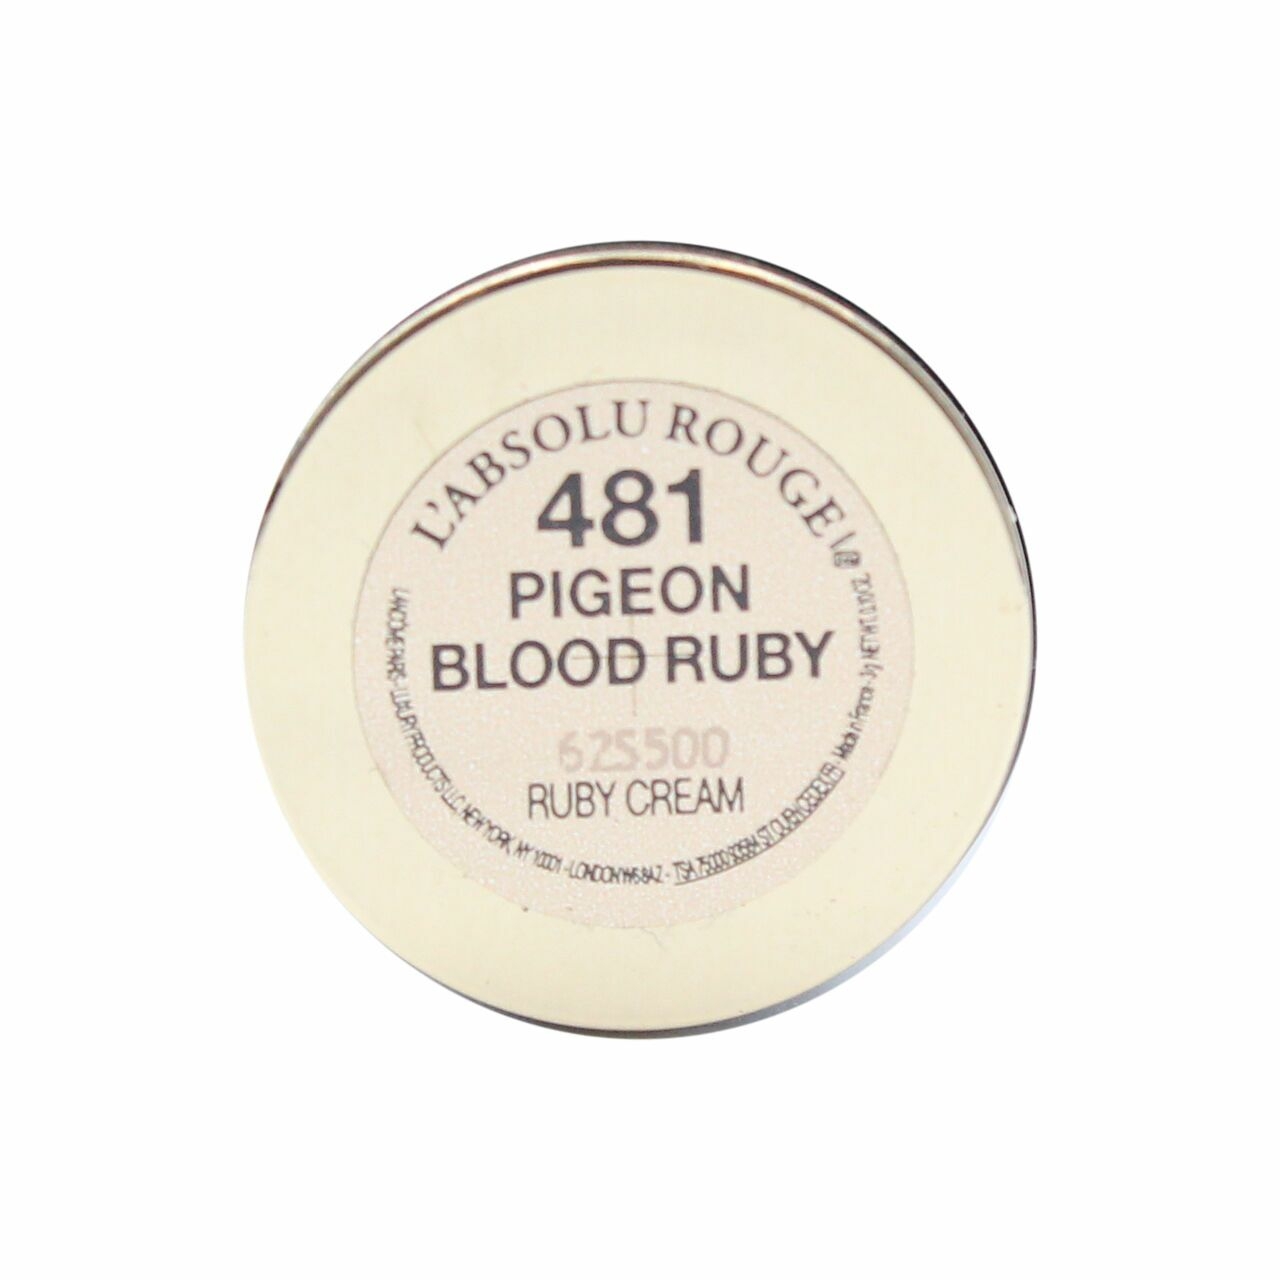 Lancome L'absolu Rouge Ruby Cream Shade 481 Pigeon Blood Ruby